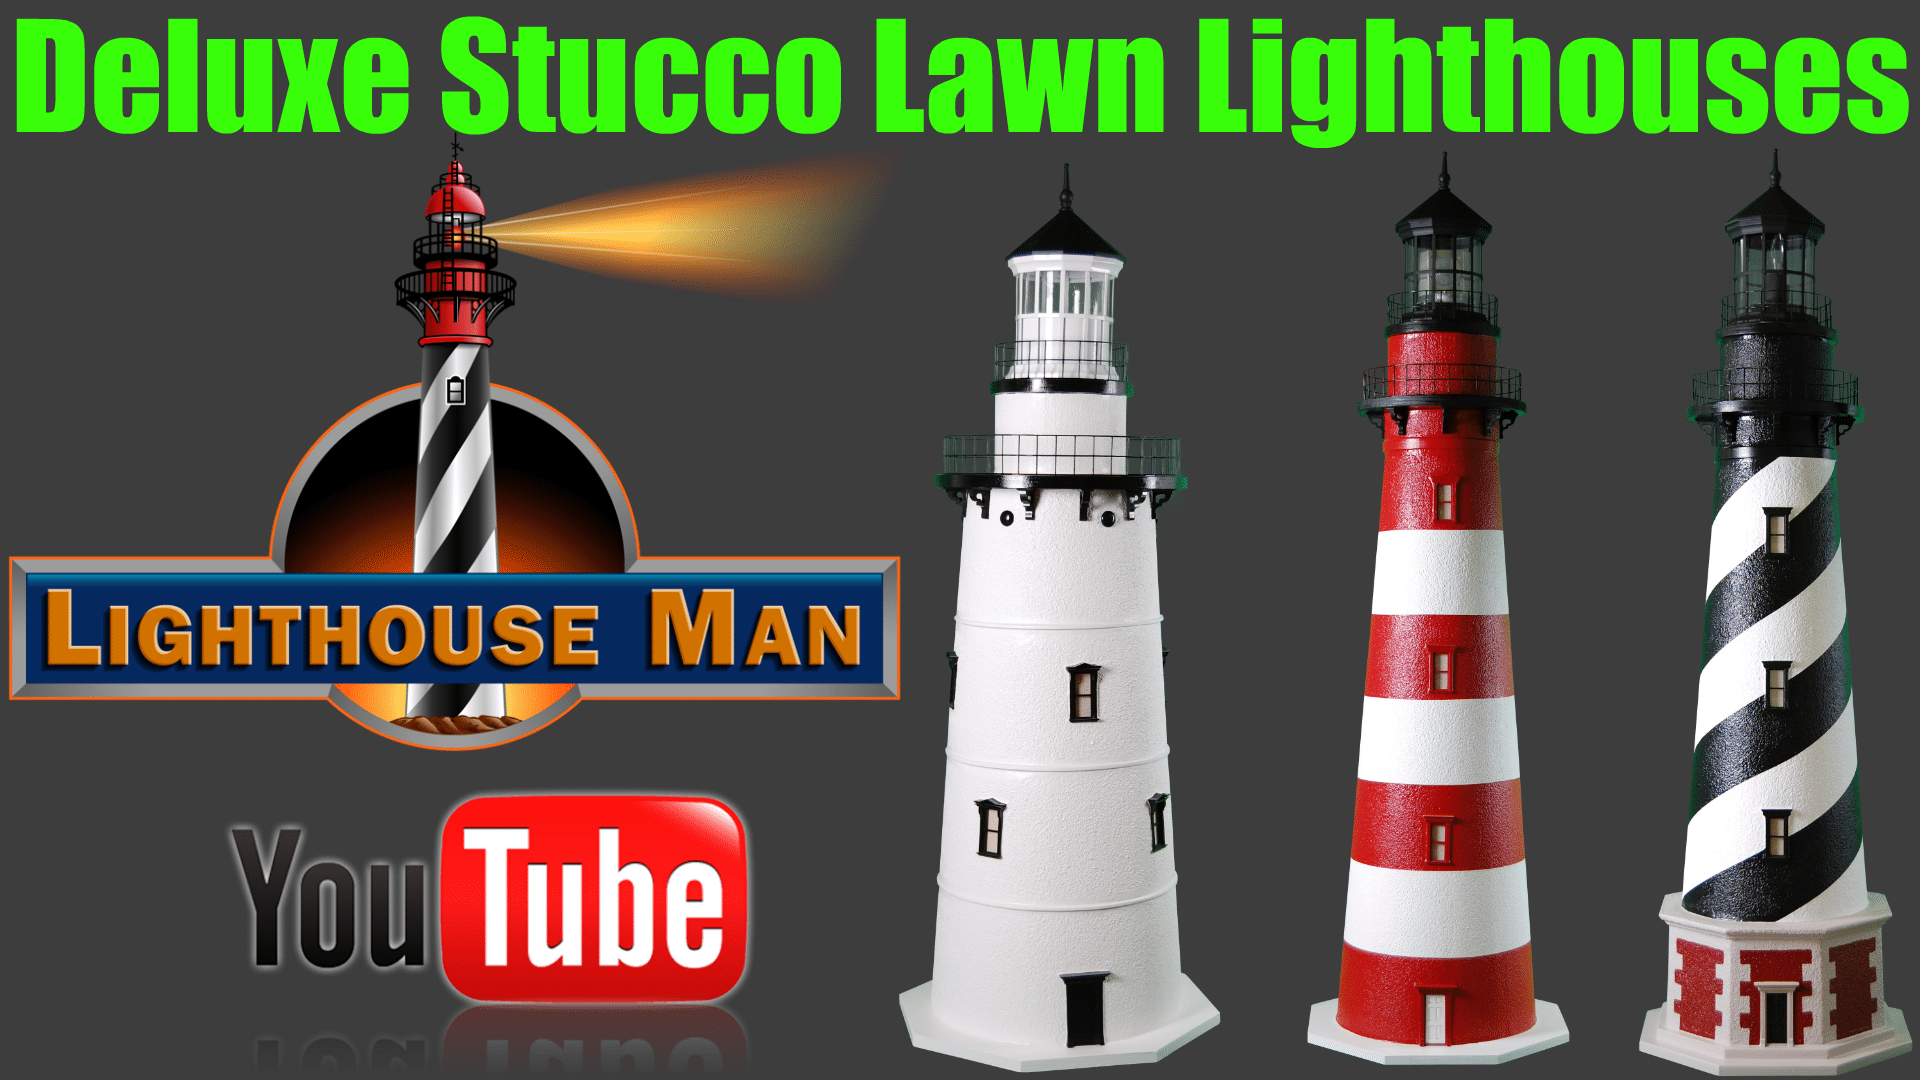 You Tube Video Intro for Deluxe Stucco Lighthouses